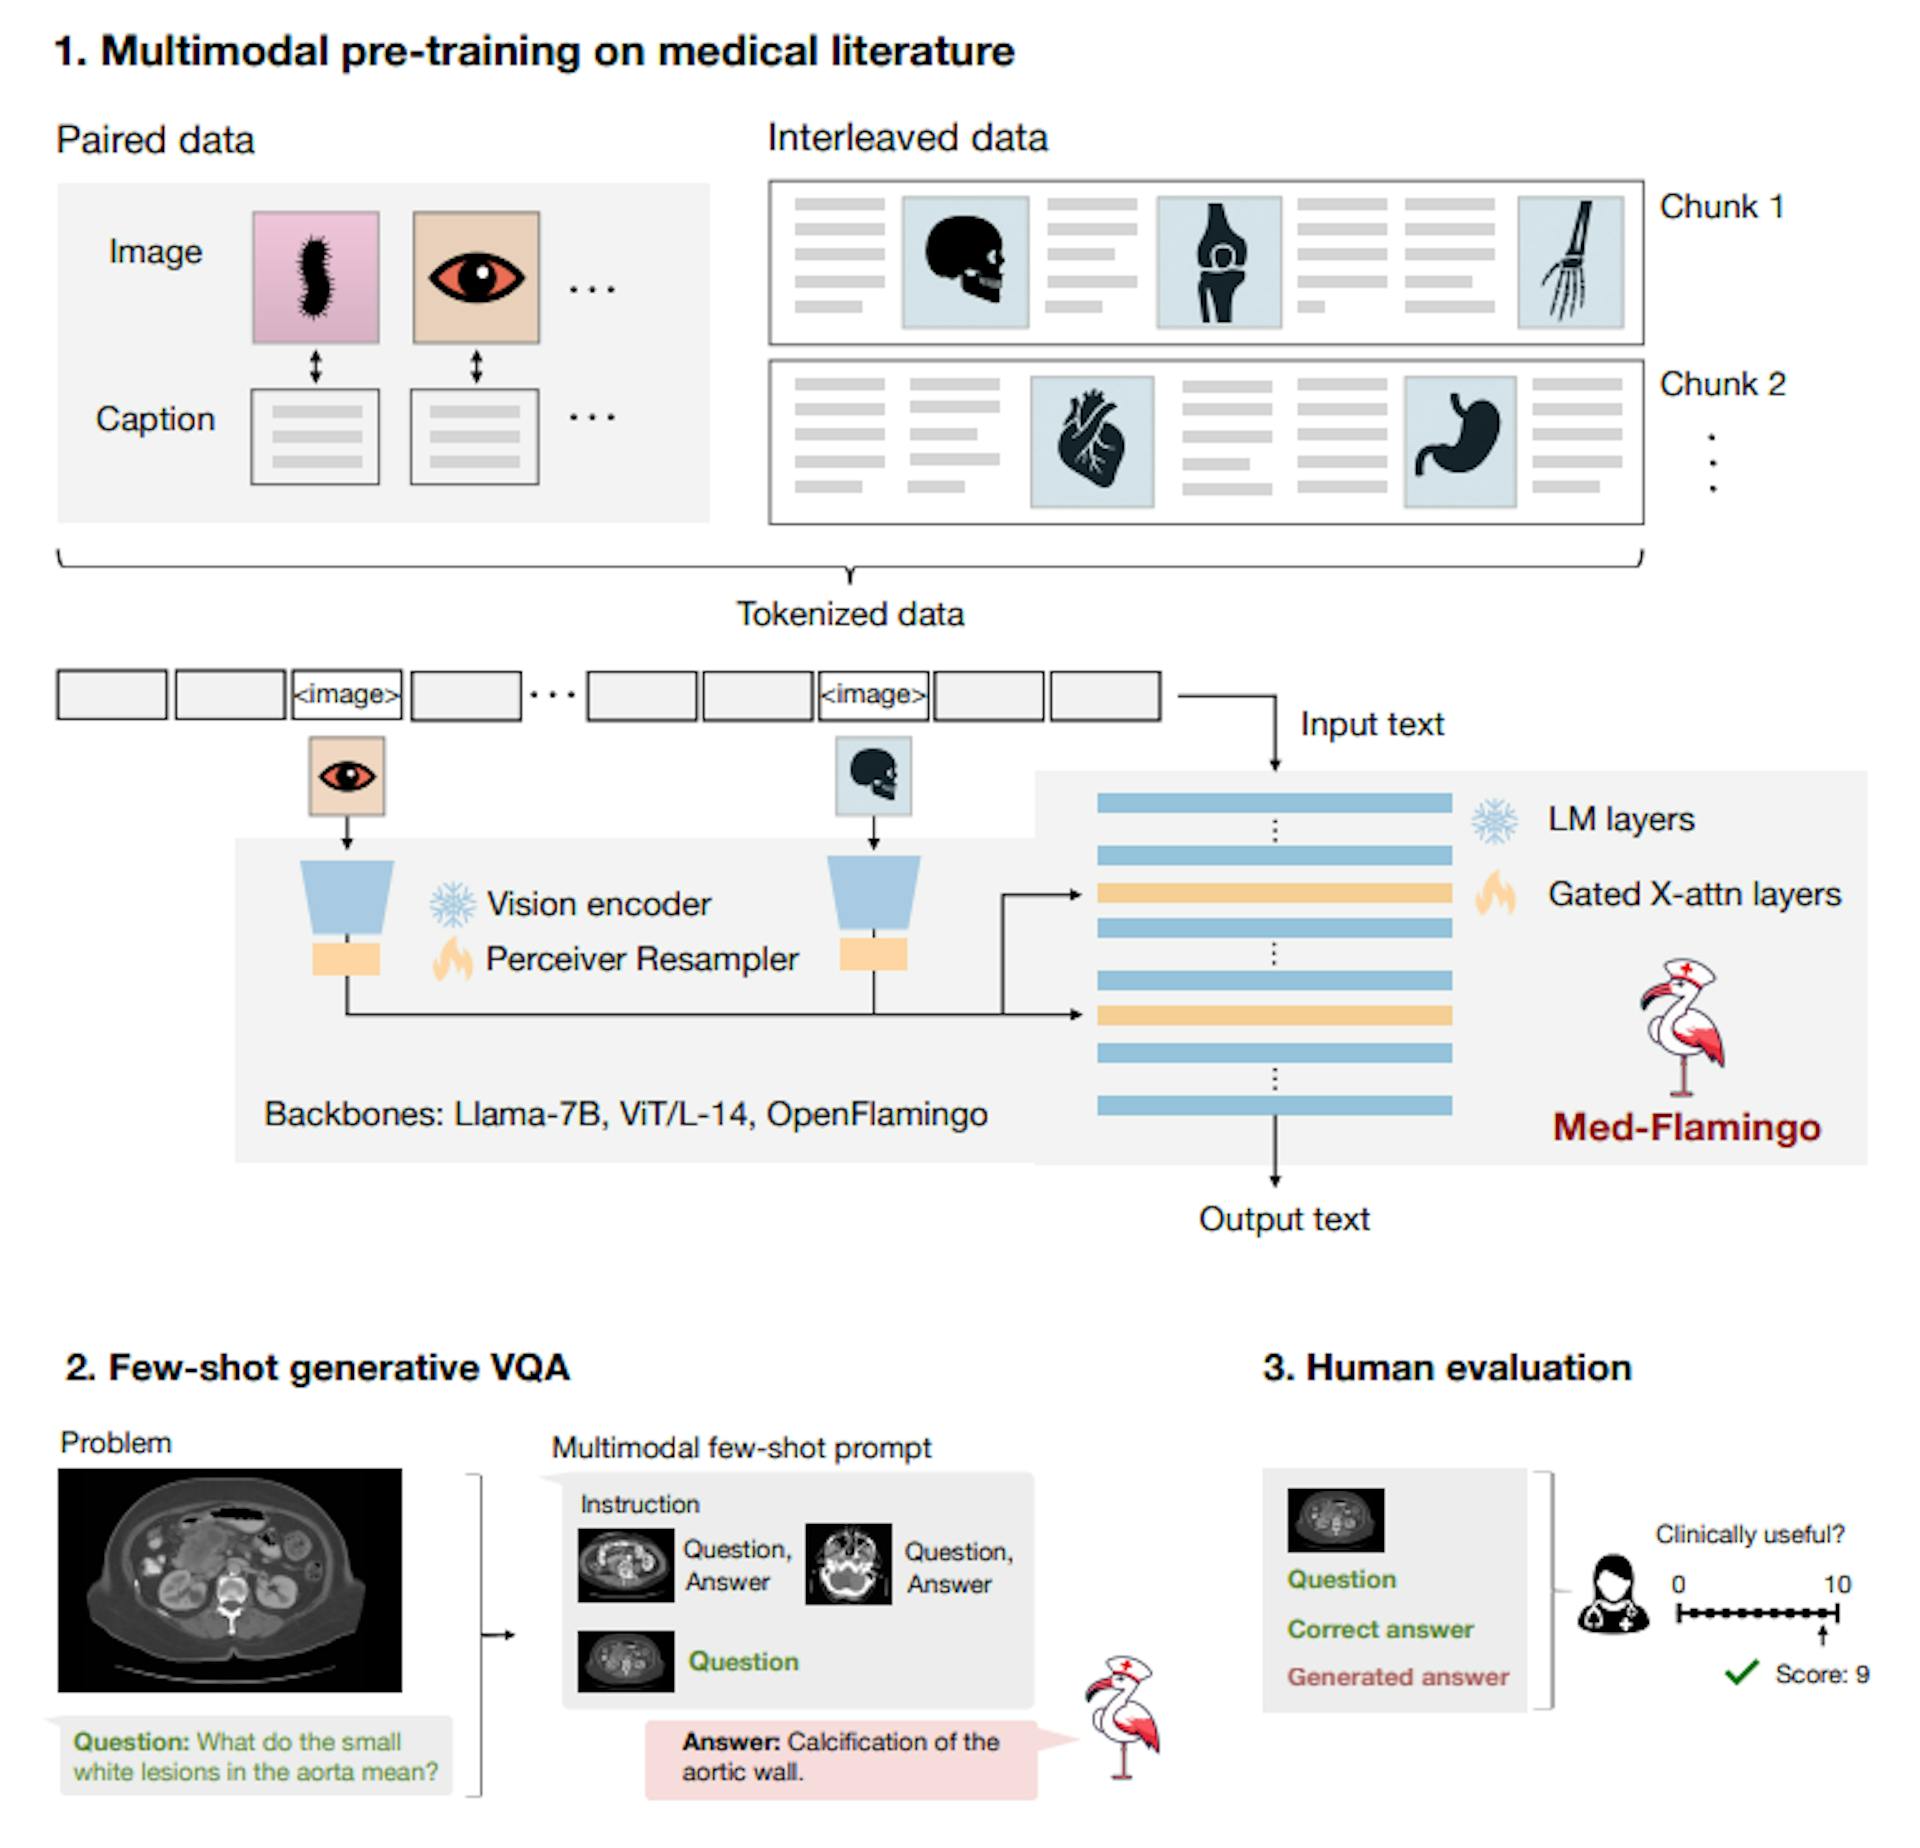 Figure 2: Overview of the Med-Flamingo model and the three steps of our study. First, we pre-train our Med-Flamingo model using paired and interleaved image-text data from the general medical domain (sourced from publications and textbooks). We initialize our model at the OpenFlamingo checkpoint continue pre-training on medical image-text data. Second, we perform few-shot generative visual question answering (VQA). For this, we leverage two existing medical VQA datasets, and a new one, Visual USMLE. Third, we conduct a human rater study with clinicians to rate generations in the context of a given image, question and correct answer. The human evaluation was conducted with a dedicated app and results in a clinical evaluation score that serves as our main metric for evaluation.